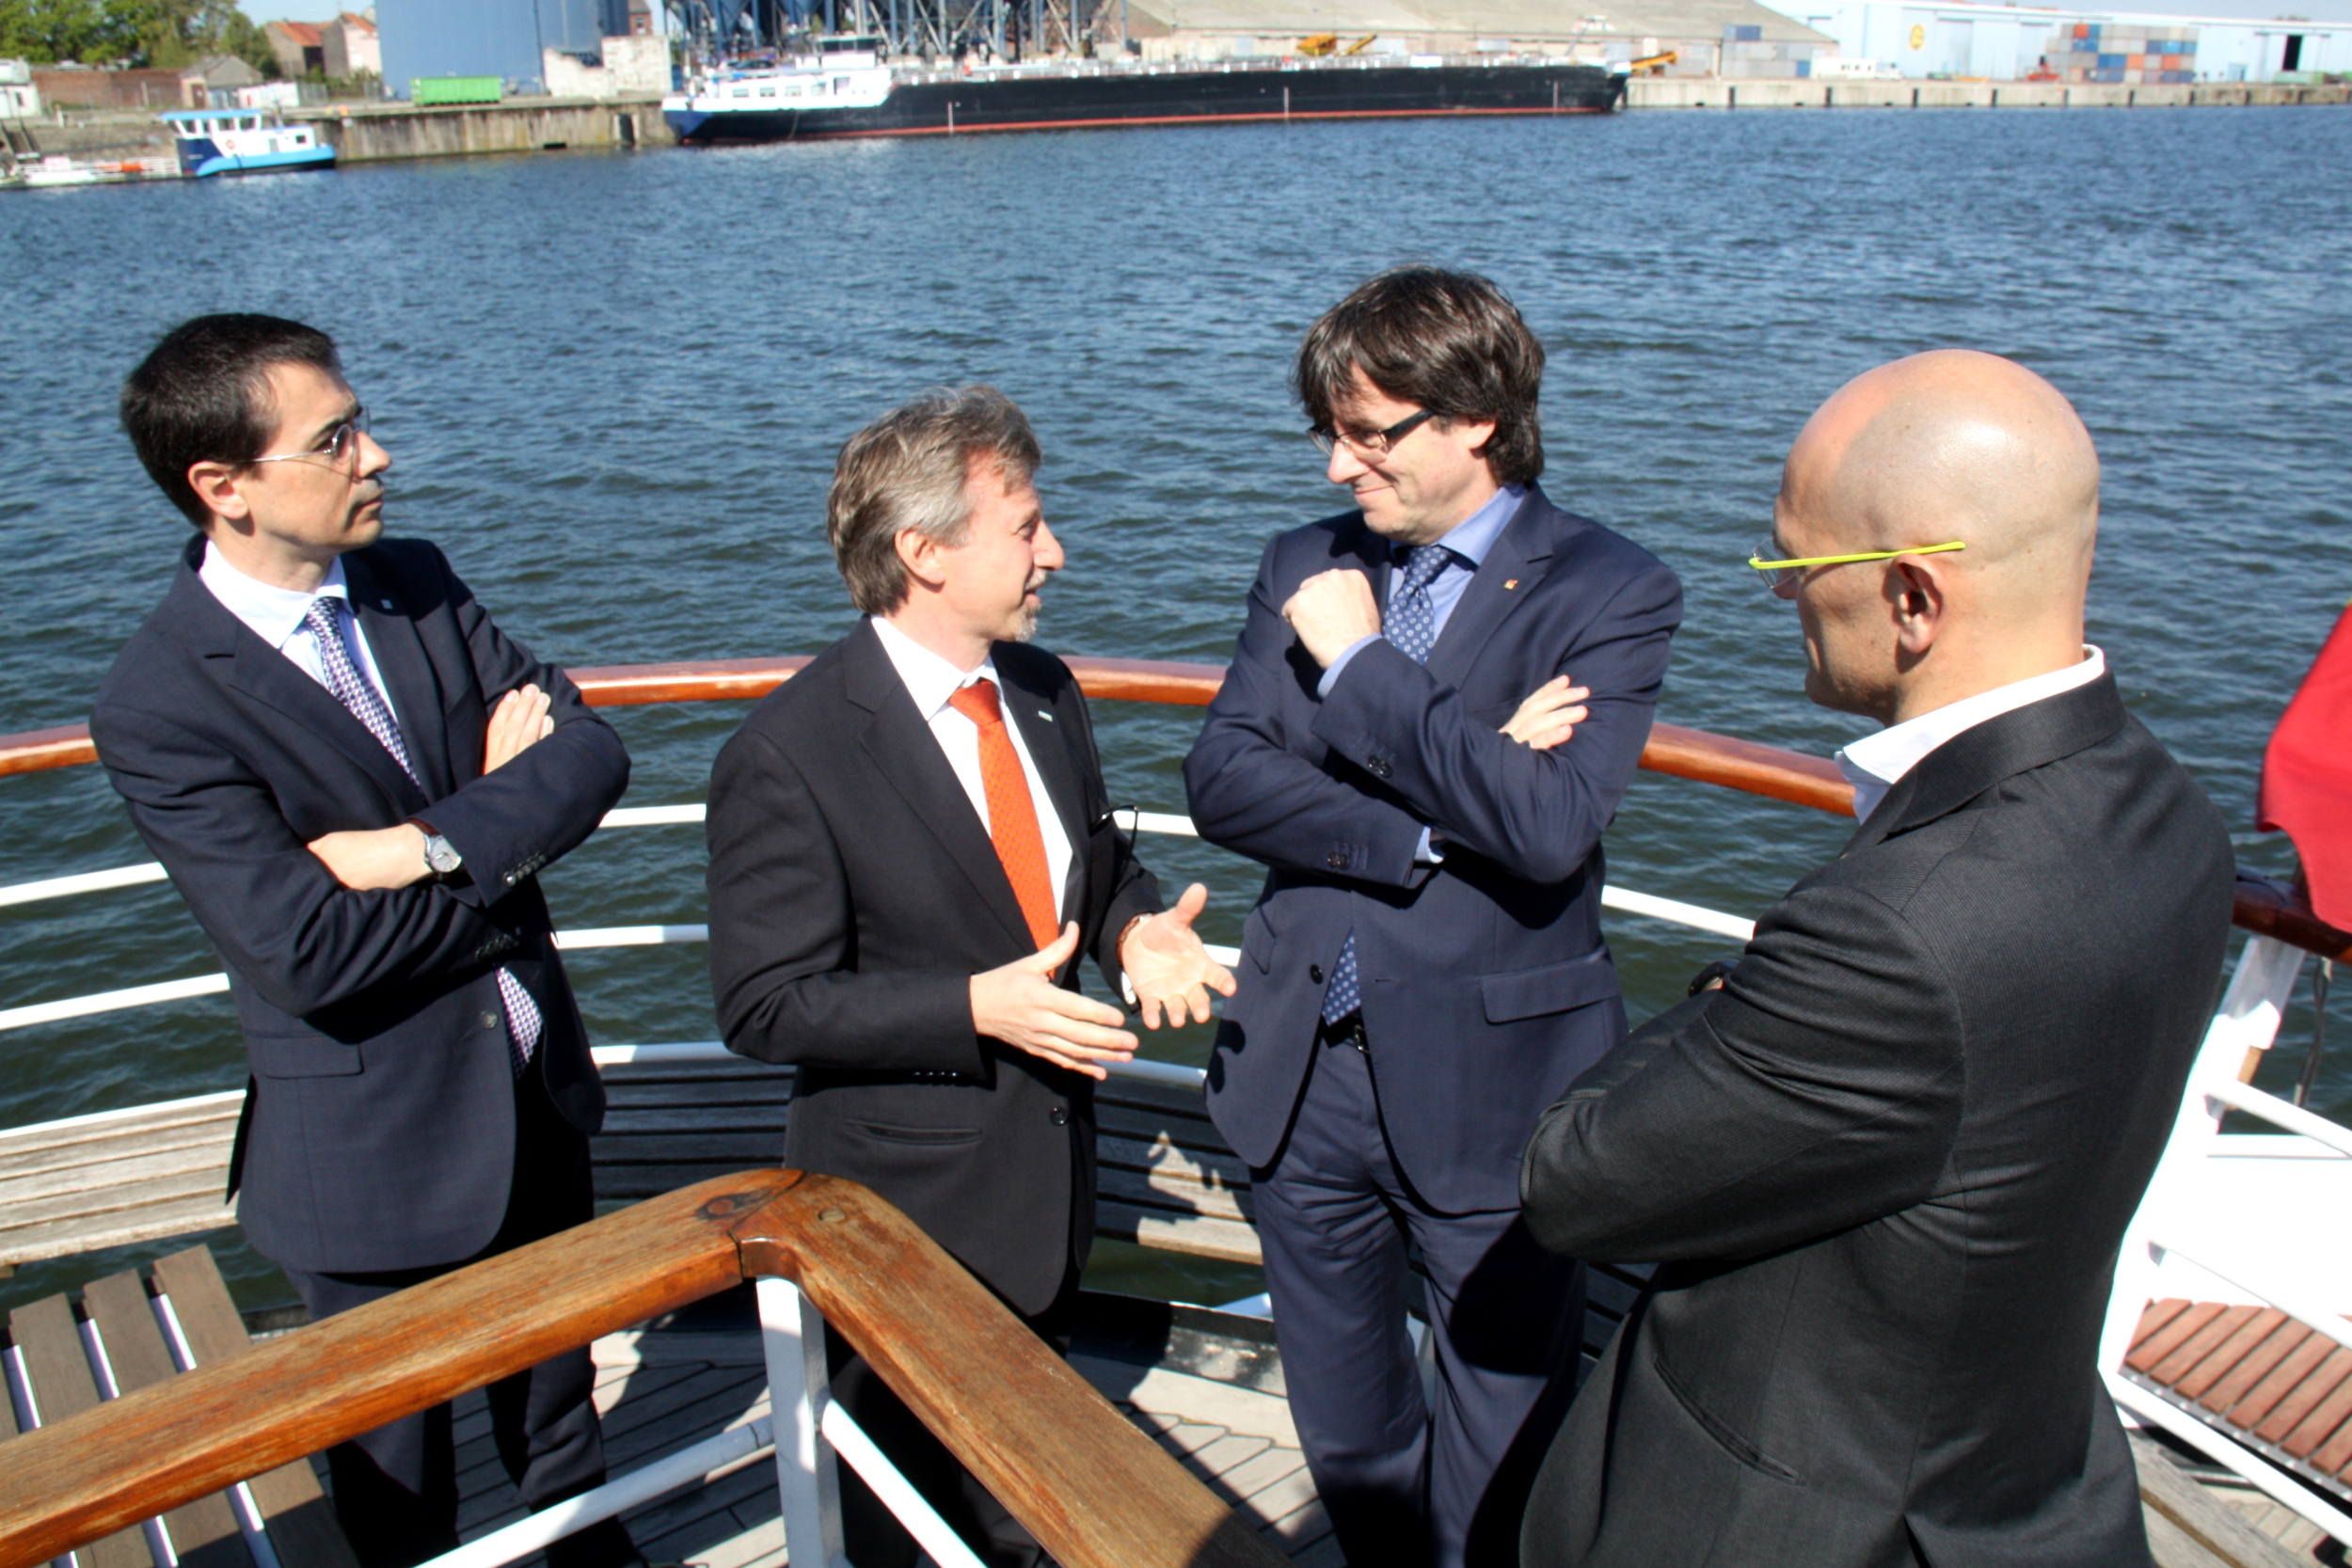 The Catalan President, Carles Puigdemont, with the Foreign Affairs Minister Raül Romeva and the permanent representative to the EU, Amadeu Altafaj, in the port of Ghent (by ACN)